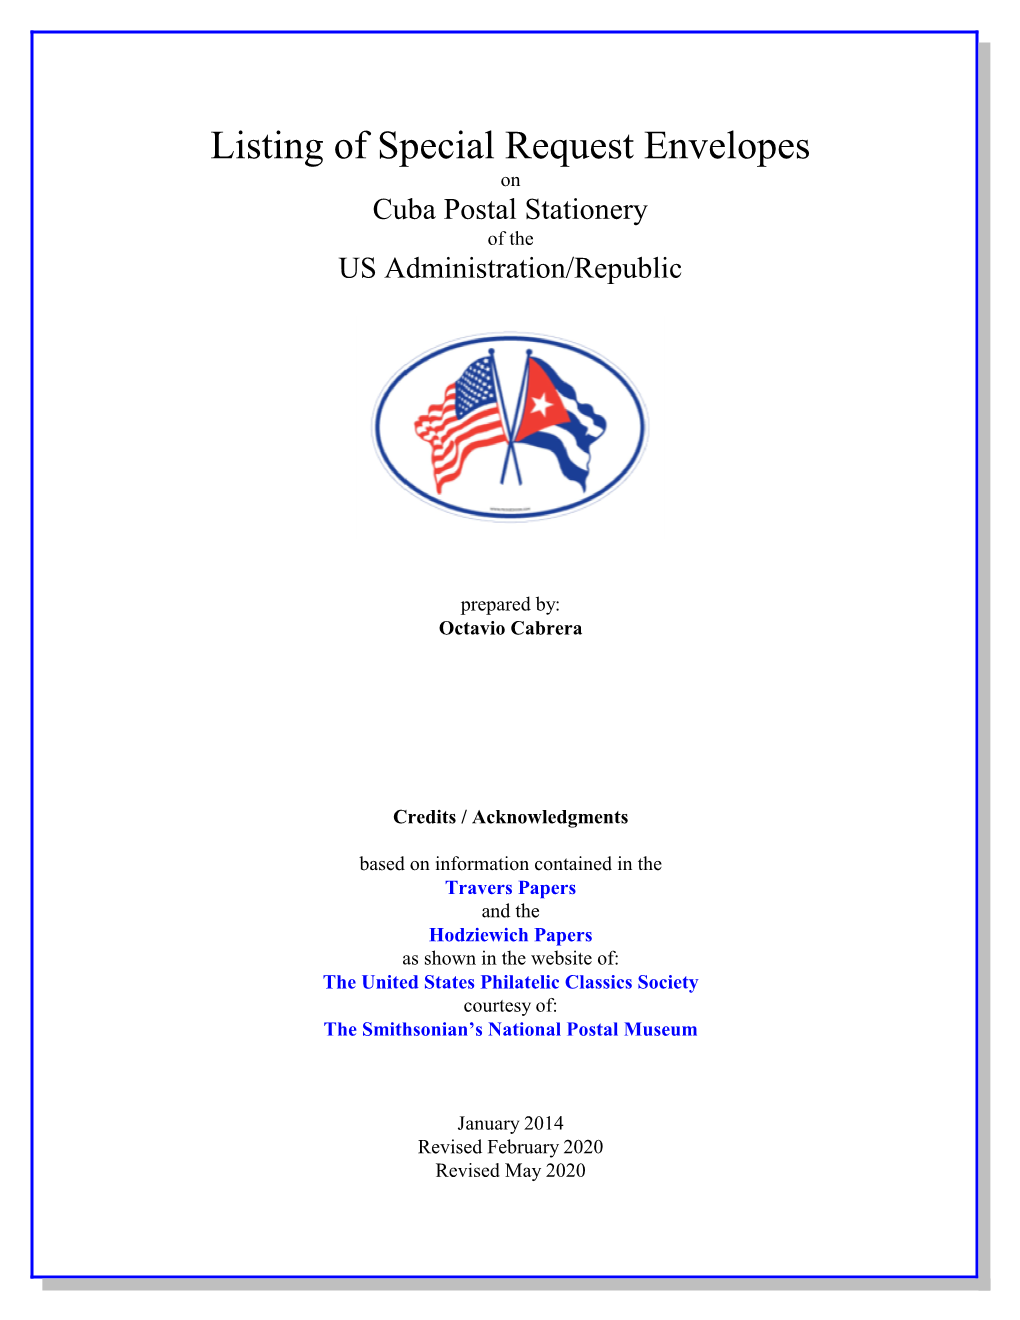 Listing of Special Request Envelopes on Cuba Postal Stationery of the US Administration/Republic